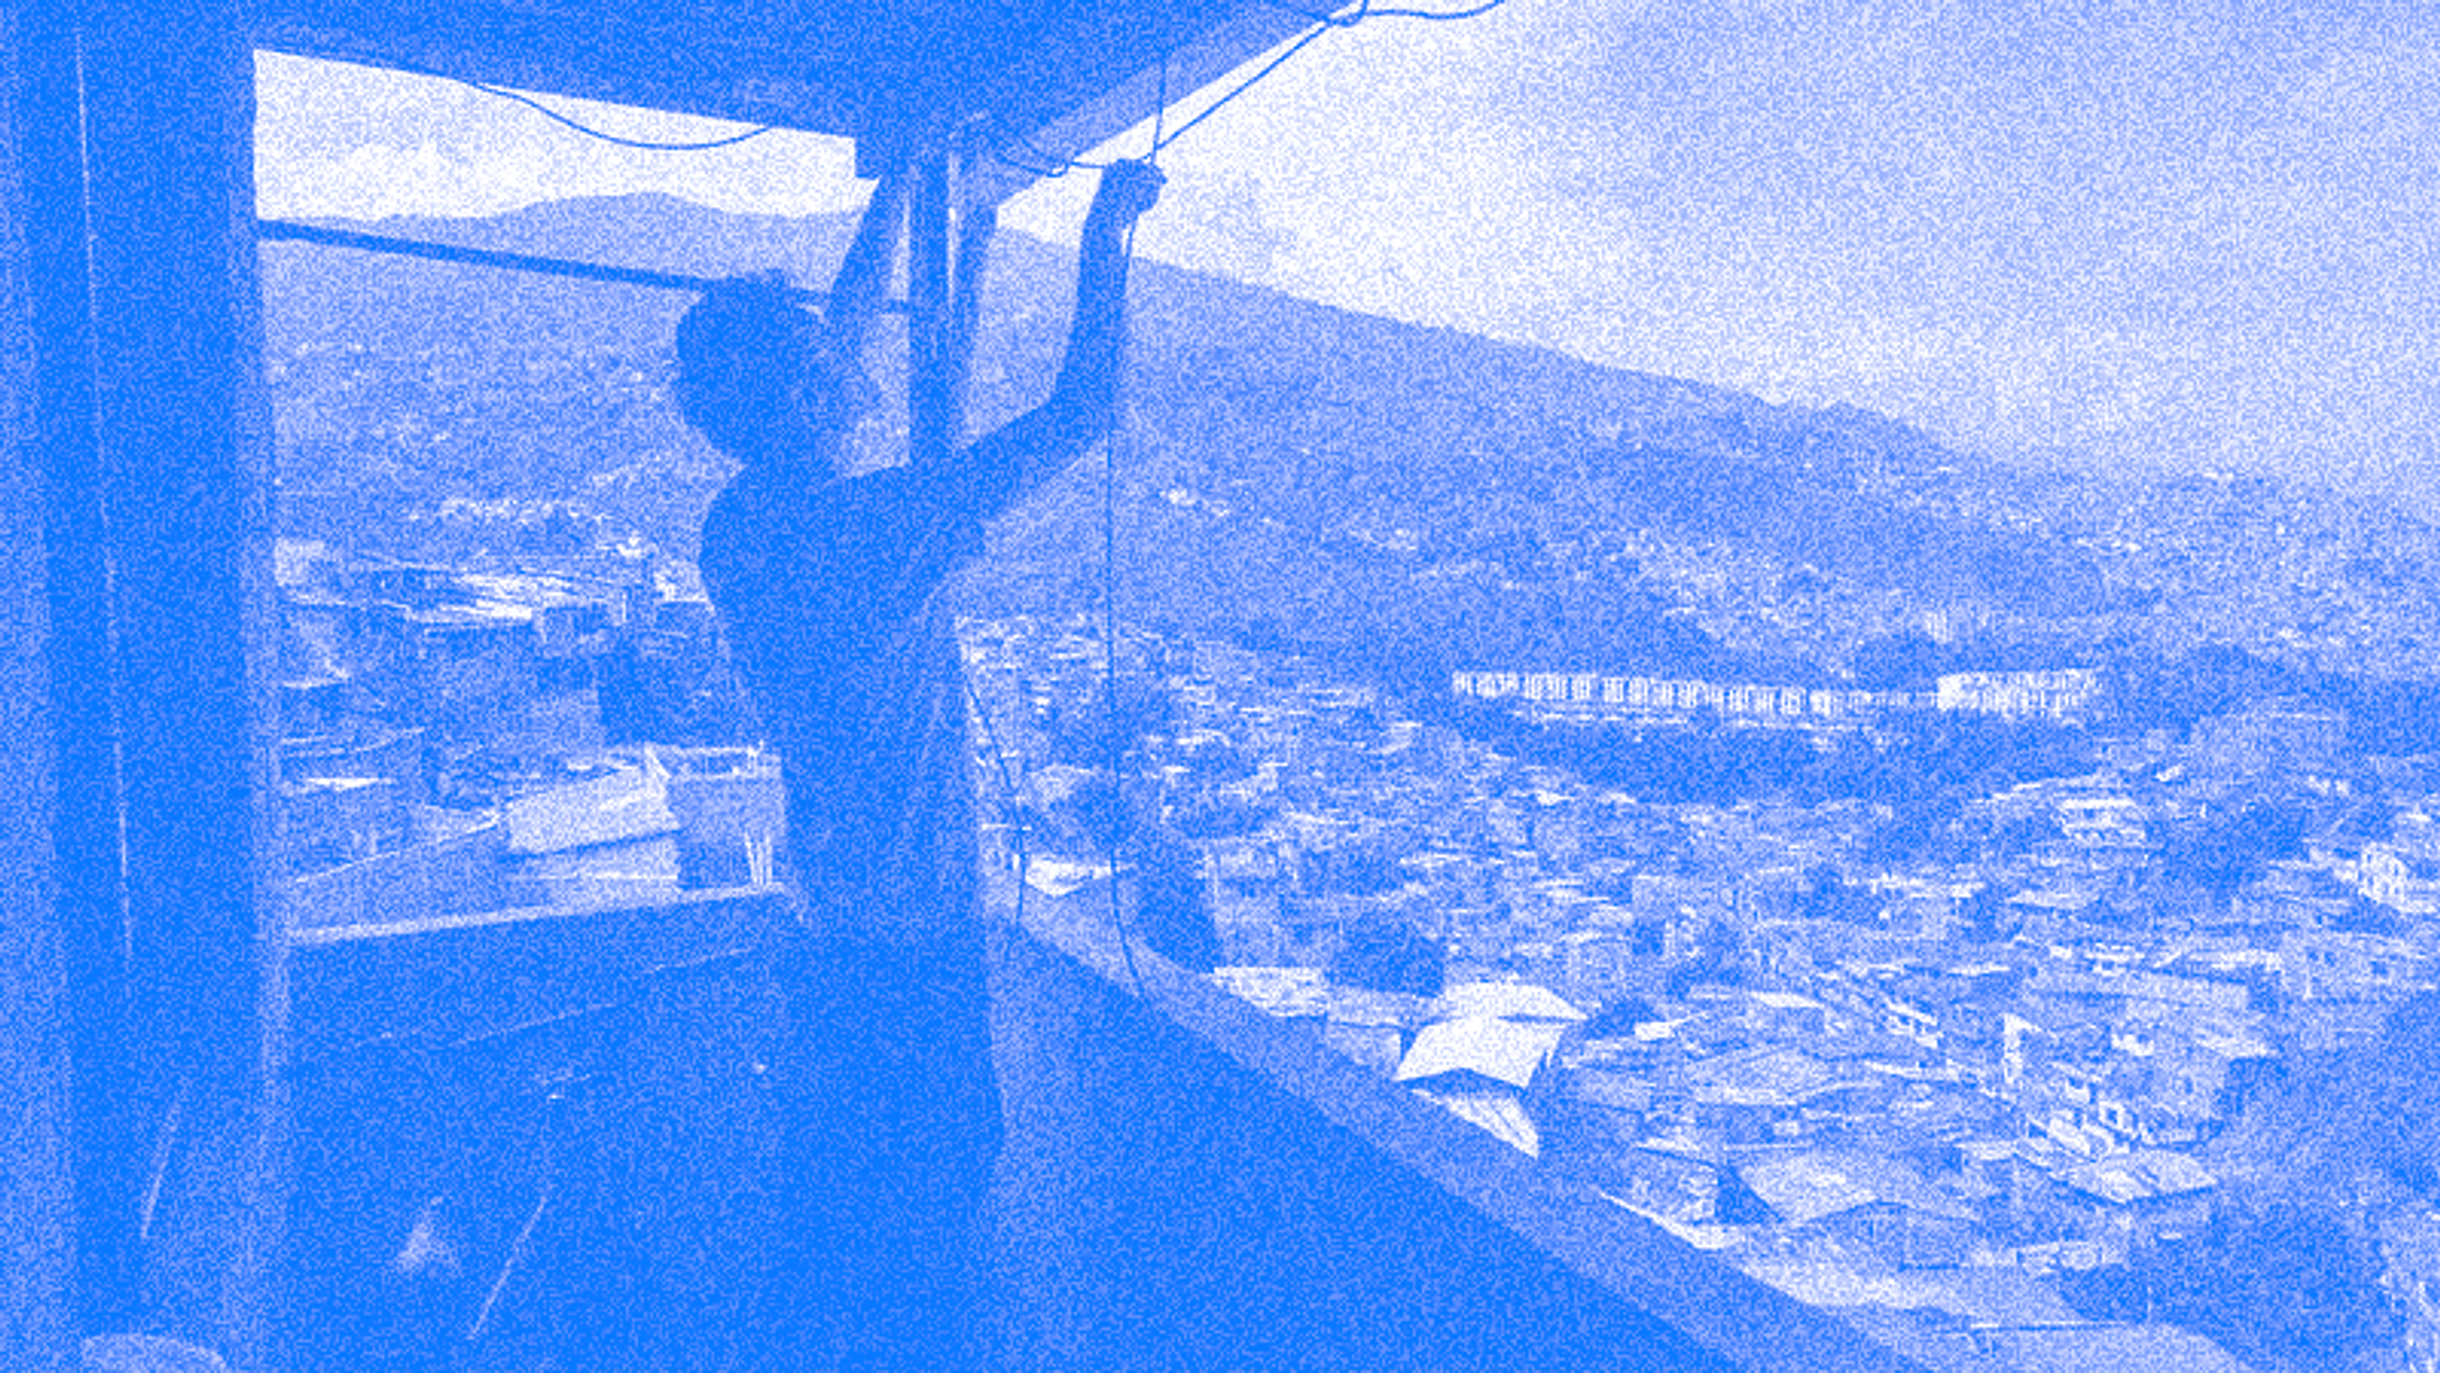 A red_medeillin member installing a network node on an apartment eave on the outskirts of Medellin, Colombia.